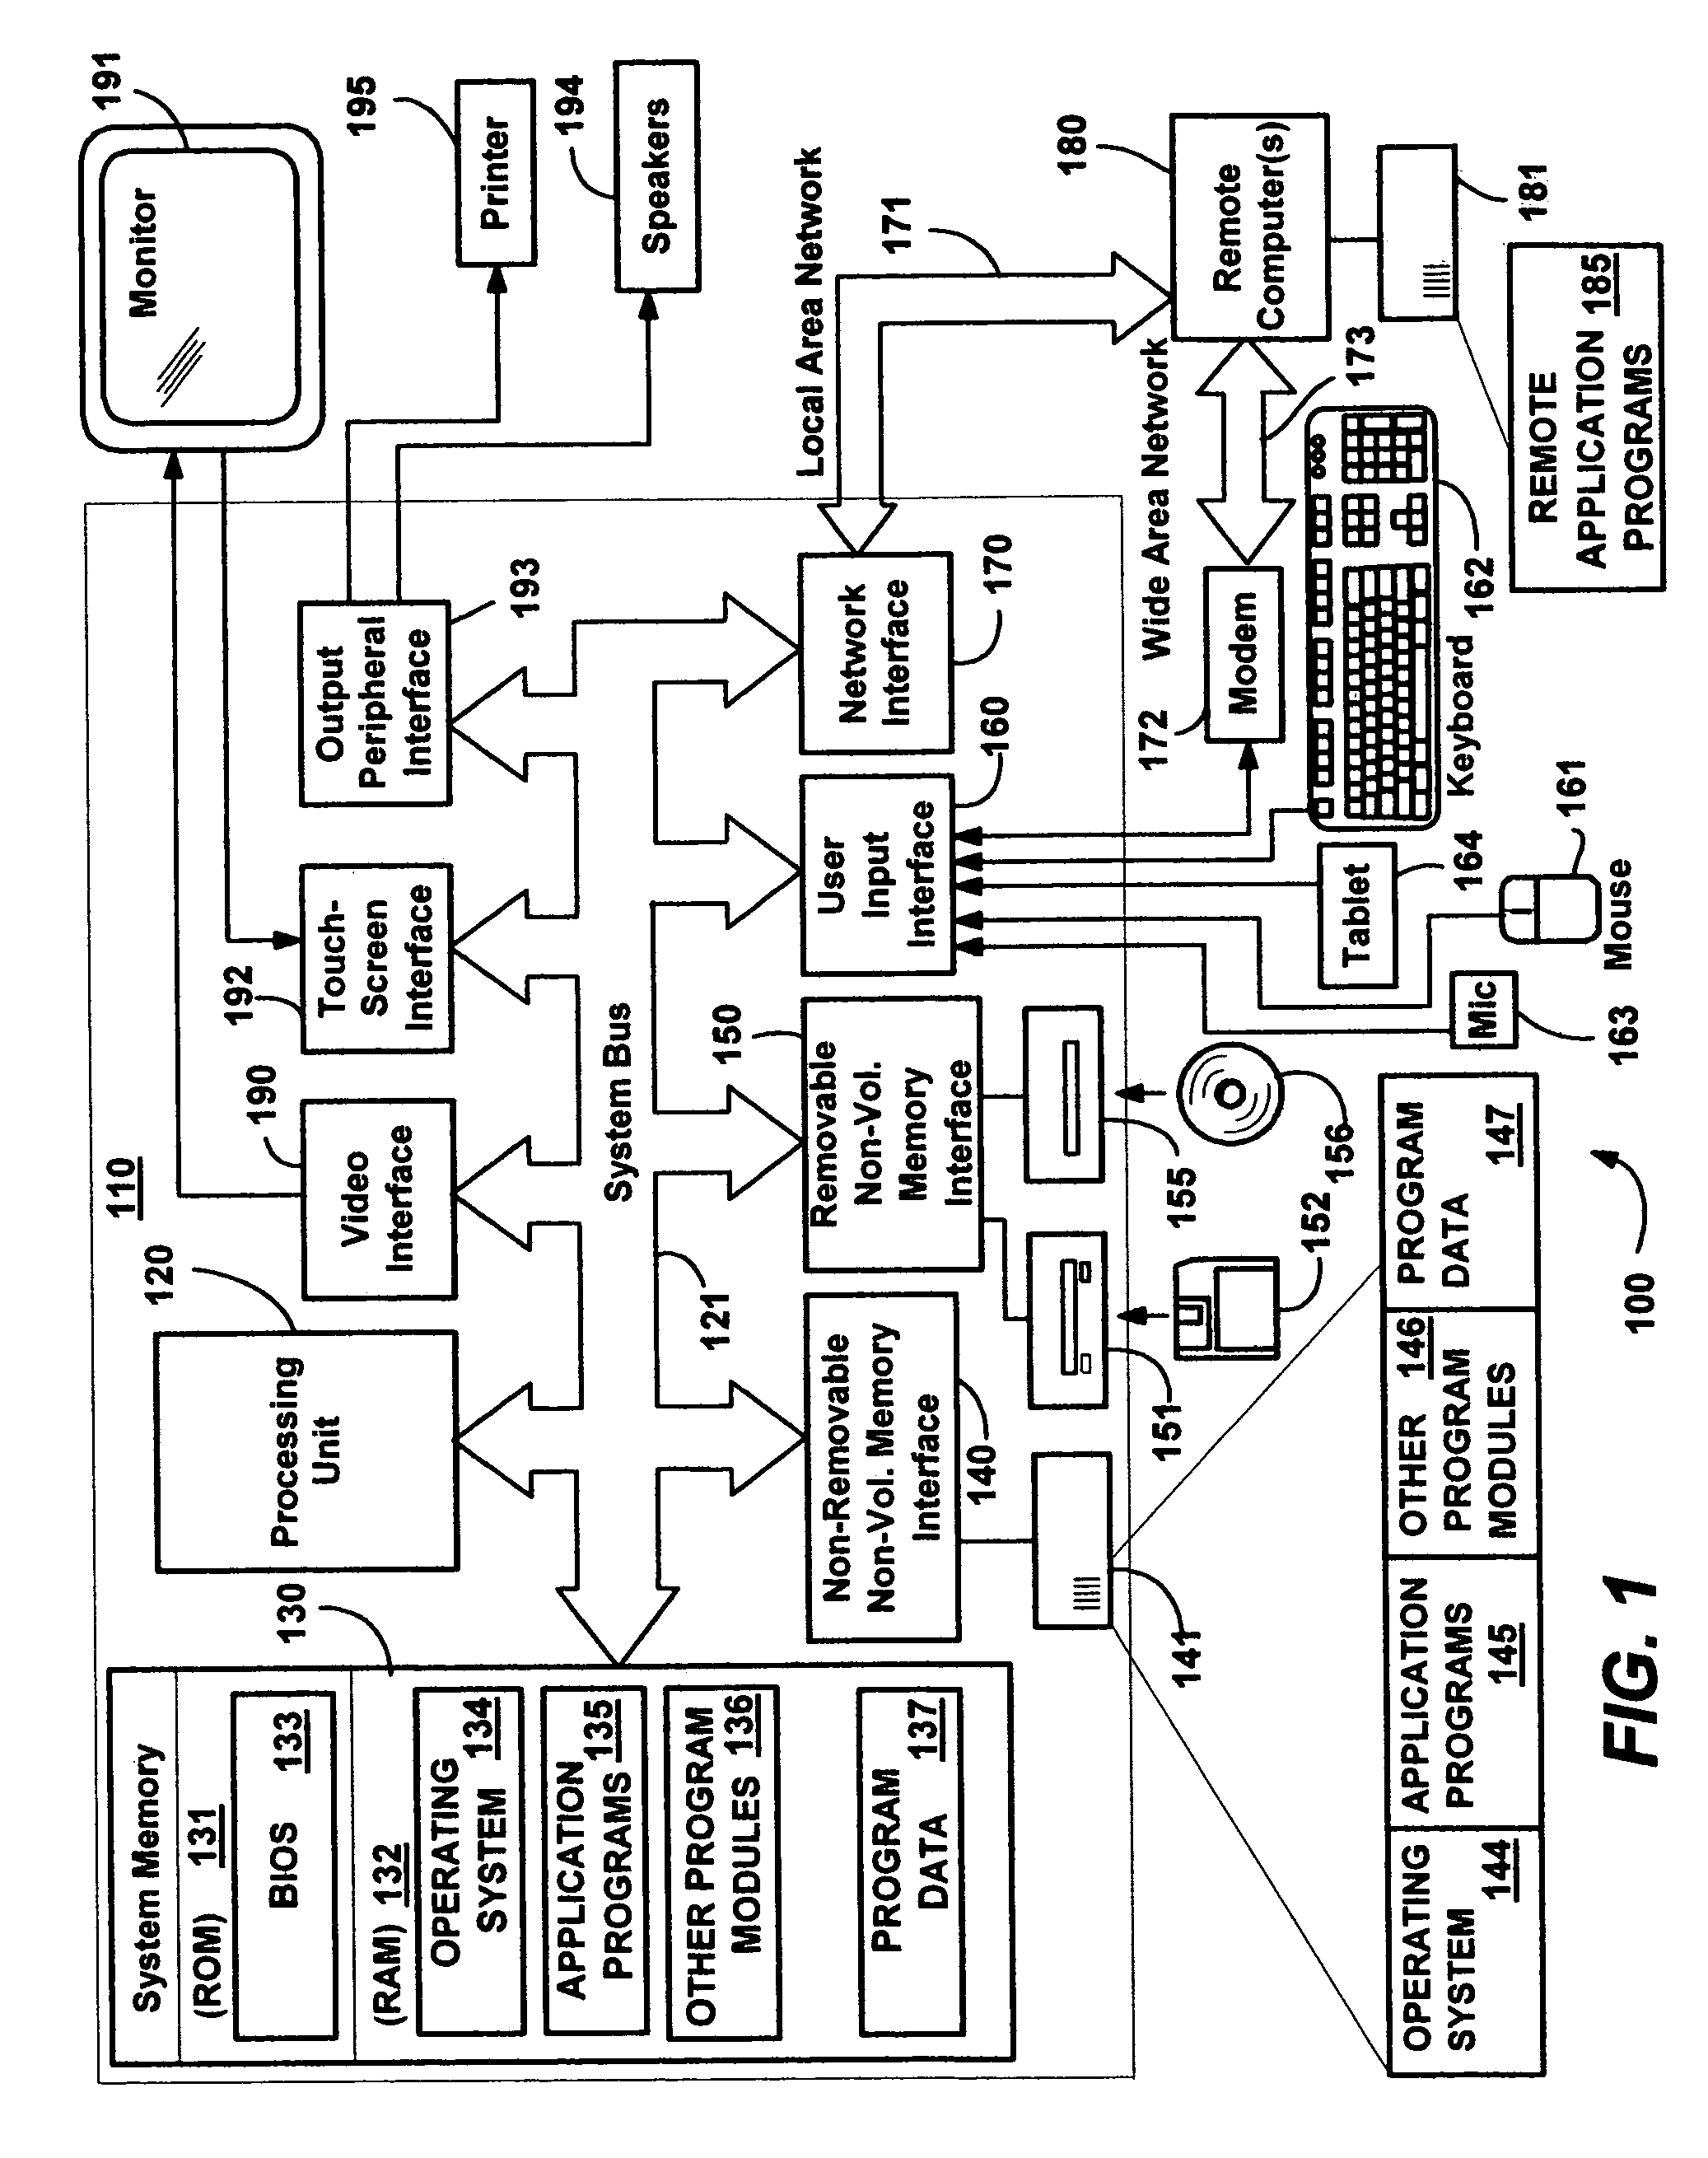 System and method for connected container recognition of a hand-drawn chart in ink input